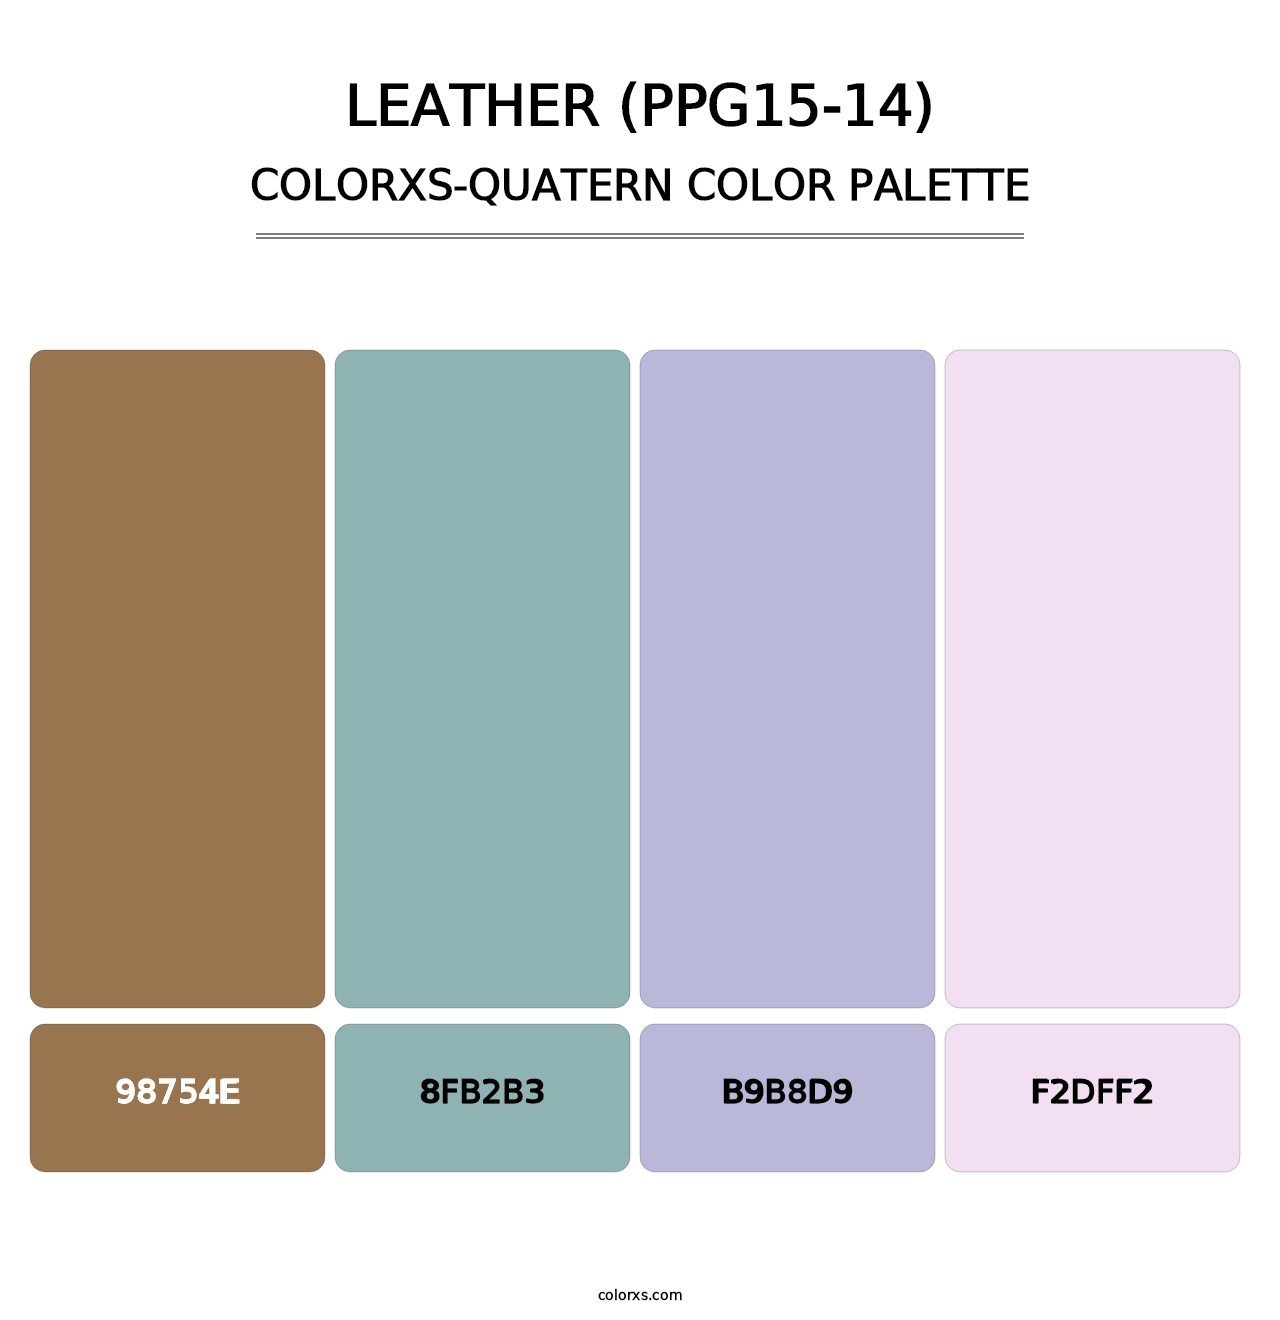 Leather (PPG15-14) - Colorxs Quatern Palette